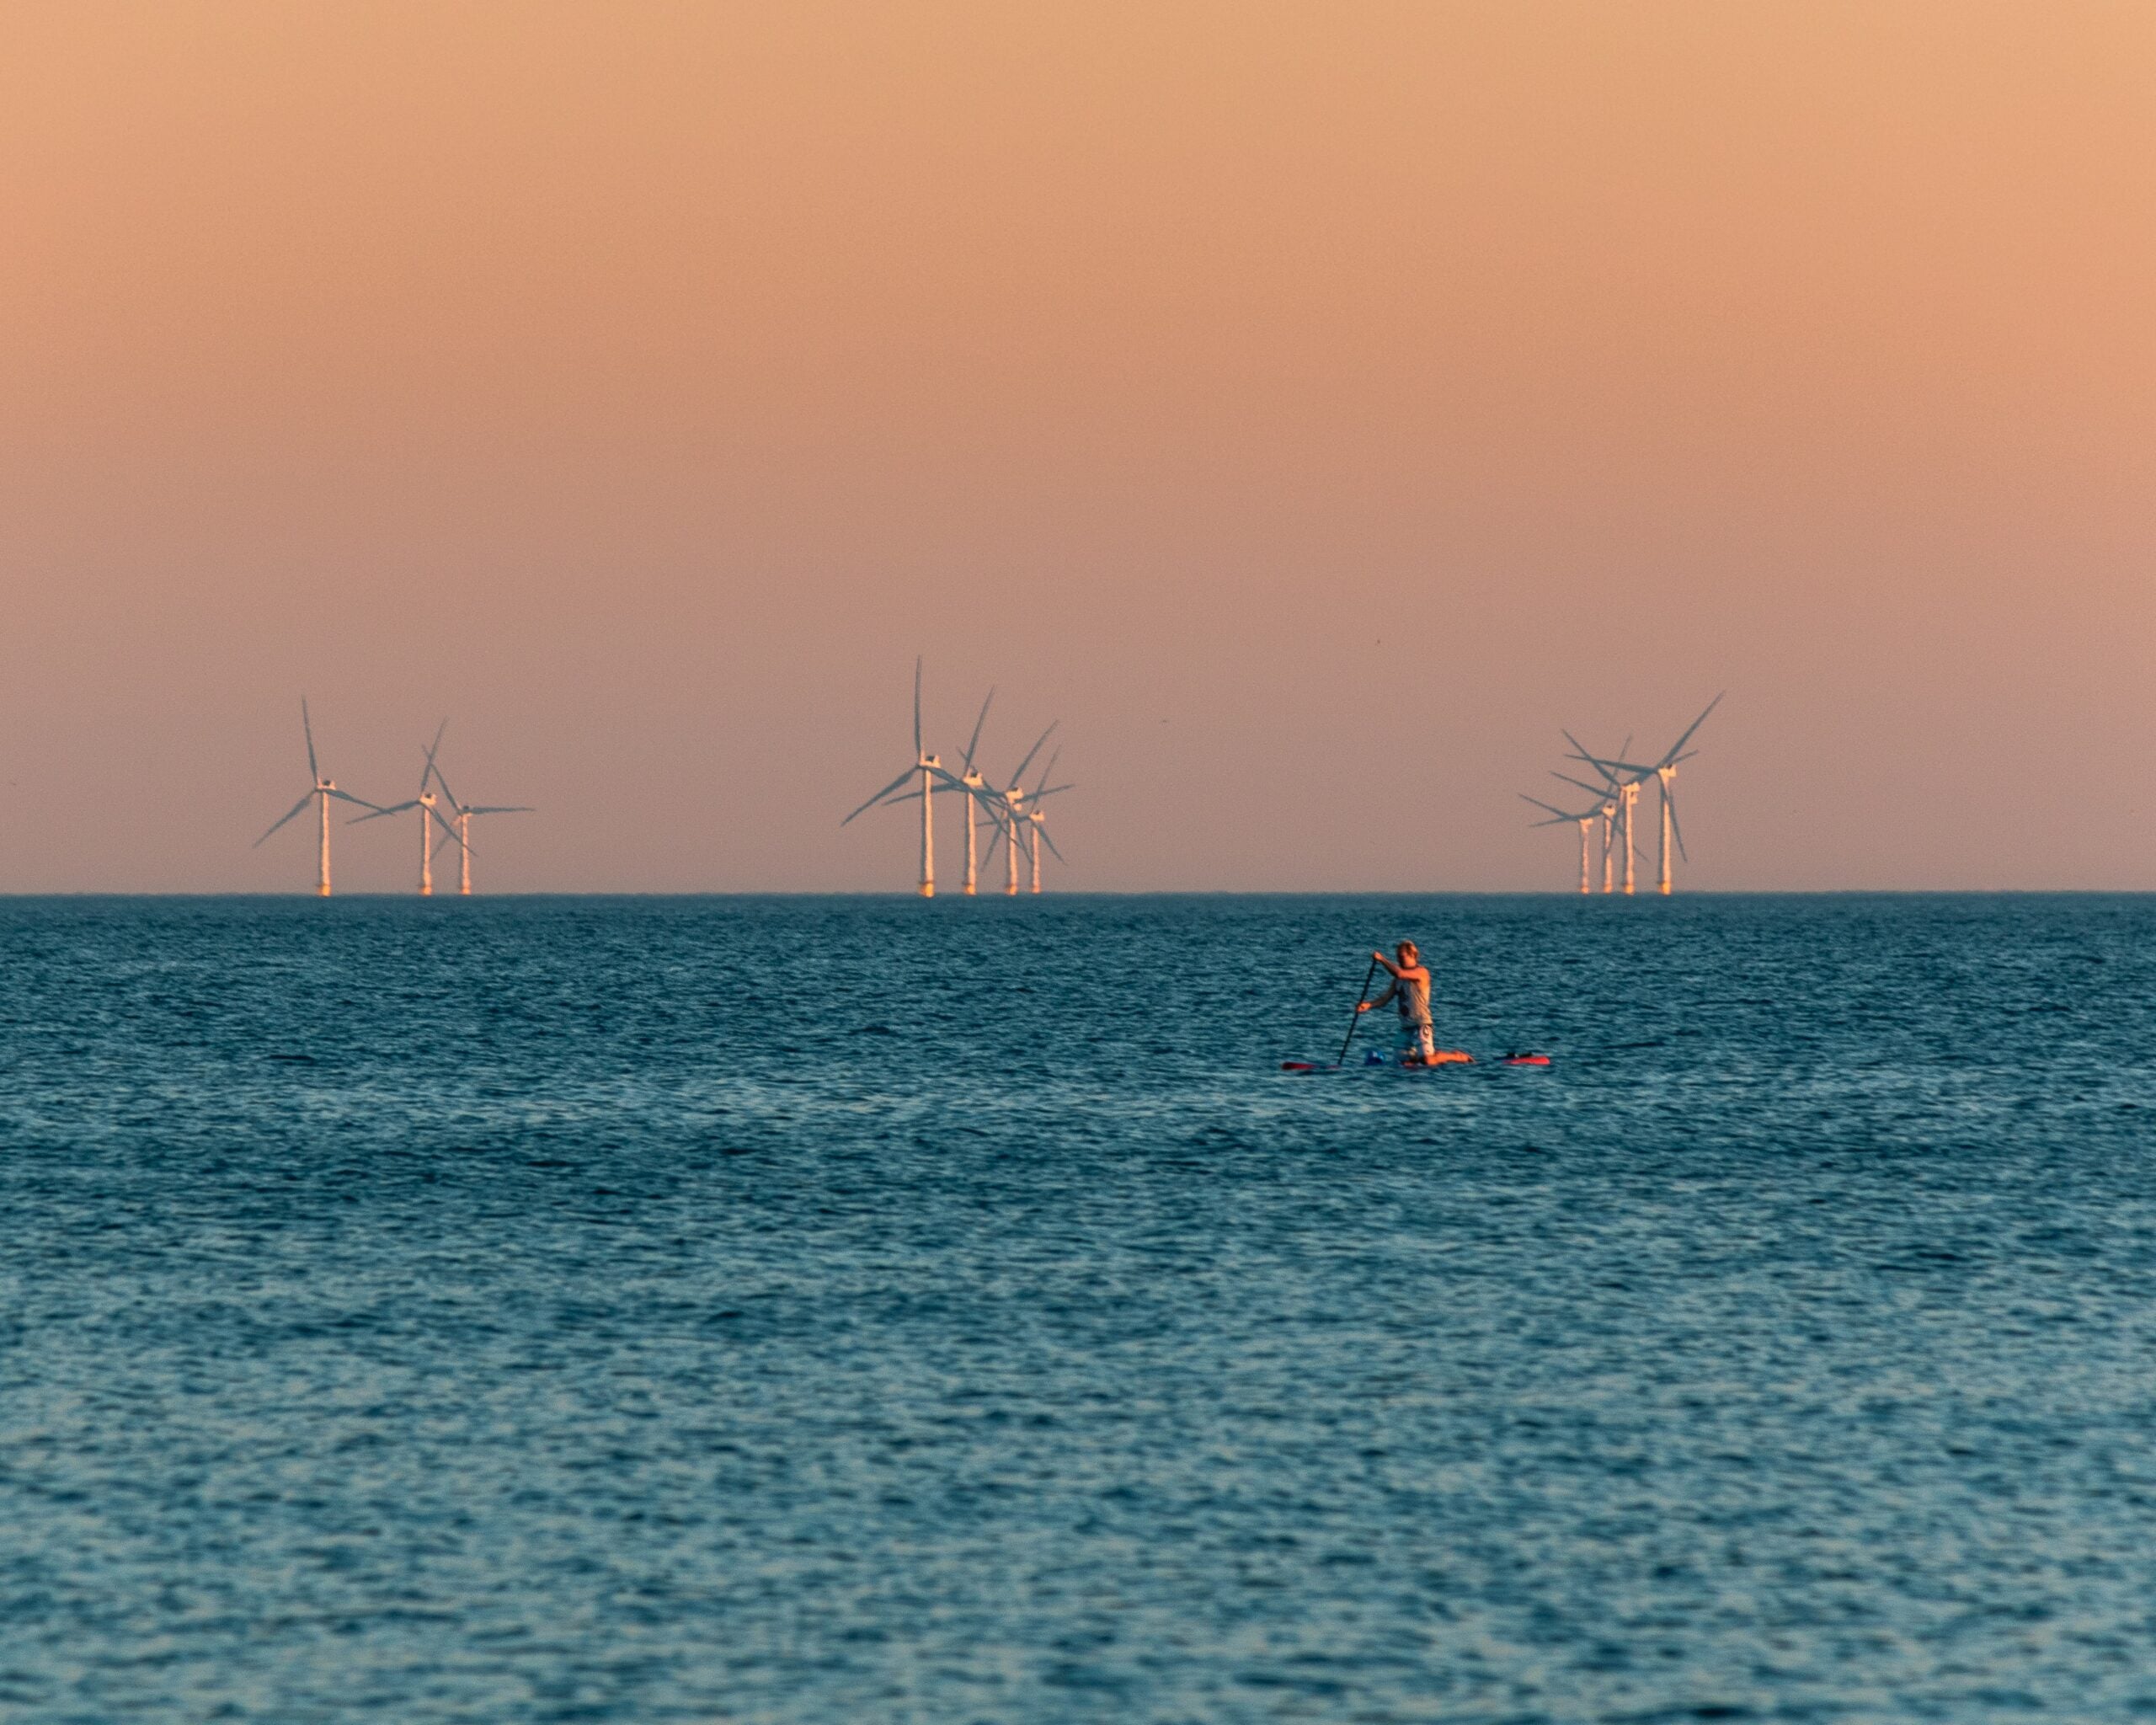 Minimizing offshore wind’s impact on nature is tricky, but not impossible thumbnail